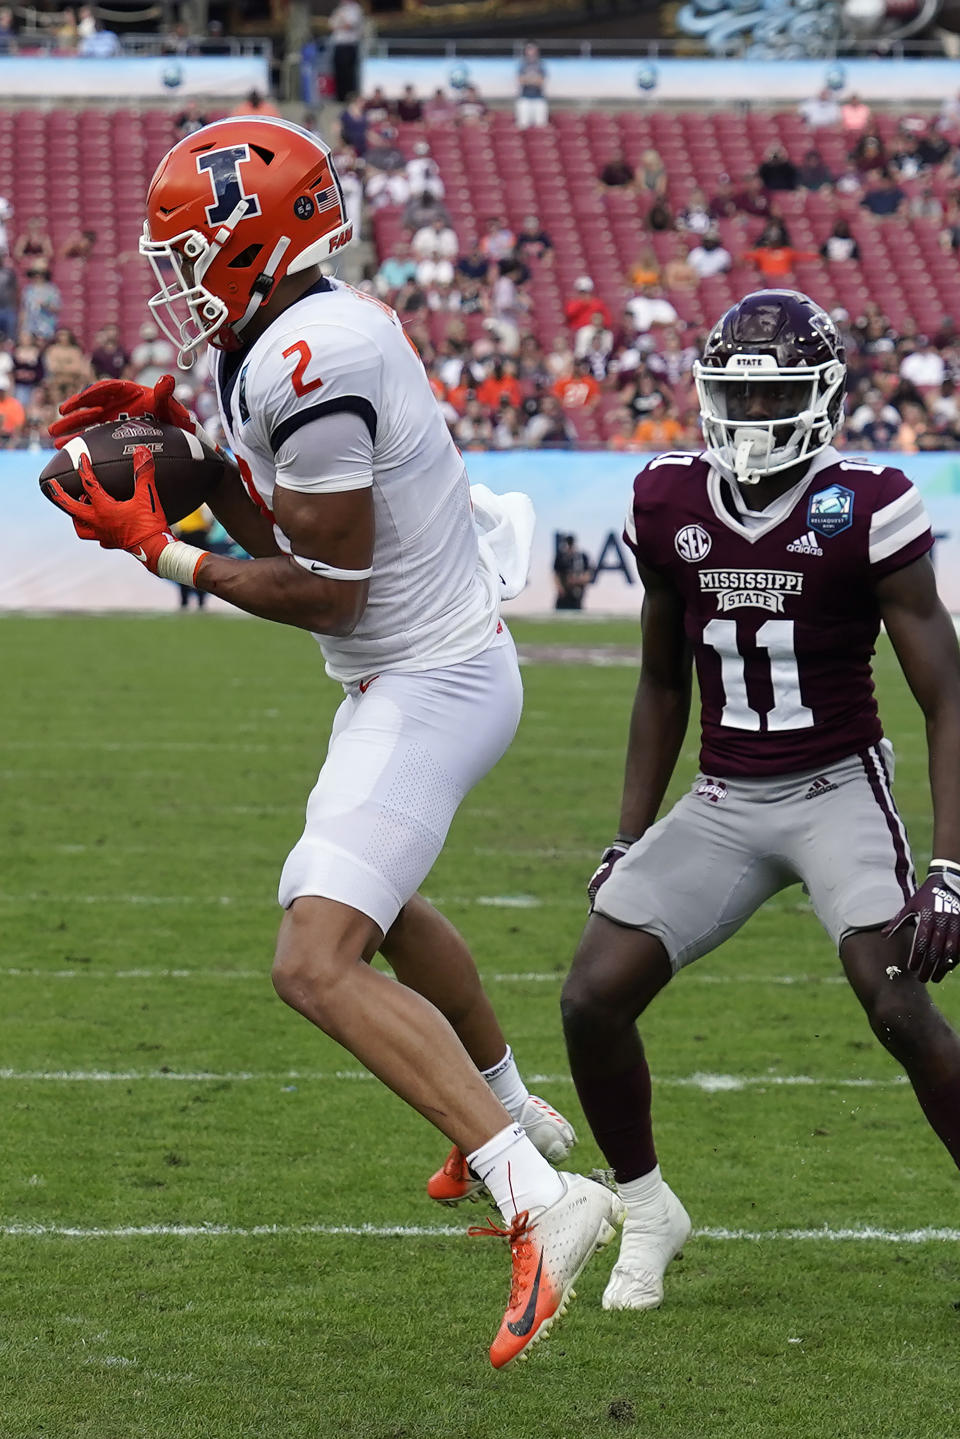 Illinois defensive back Matthew Bailey (2) intercepts a Mississippi State pass during the first half of the ReliaQuest Bowl NCAA college football game Monday, Jan. 2, 2023, in Tampa, Fla. Looking on is wide receiver Jaden Walley (11). (AP Photo/Chris O'Meara)